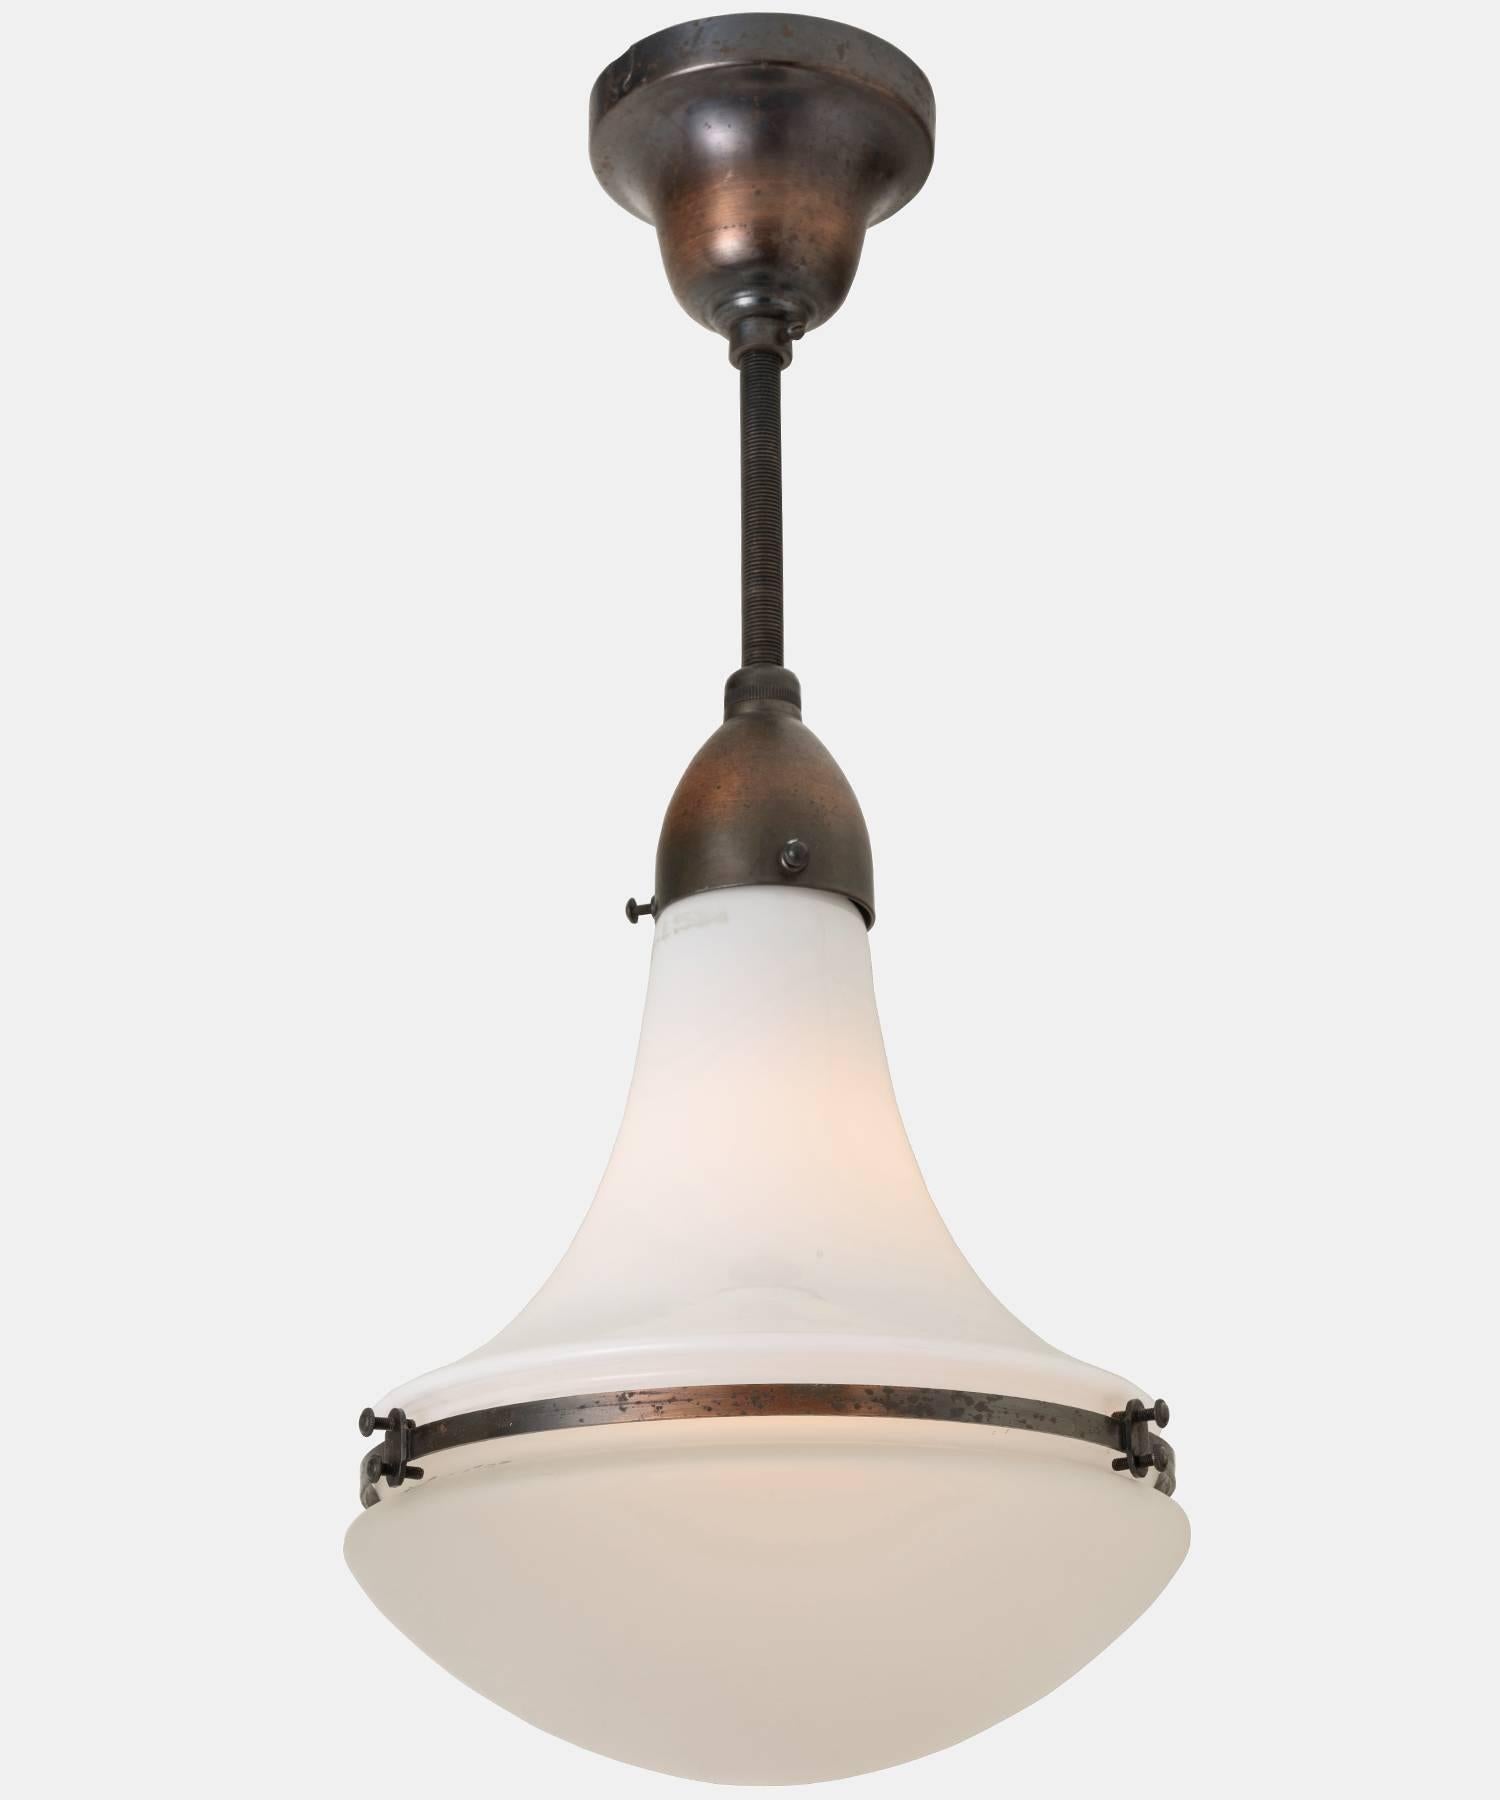 Produced by AEG and Siemens, with an upper opal glass shade, and lower frosted glass shade.